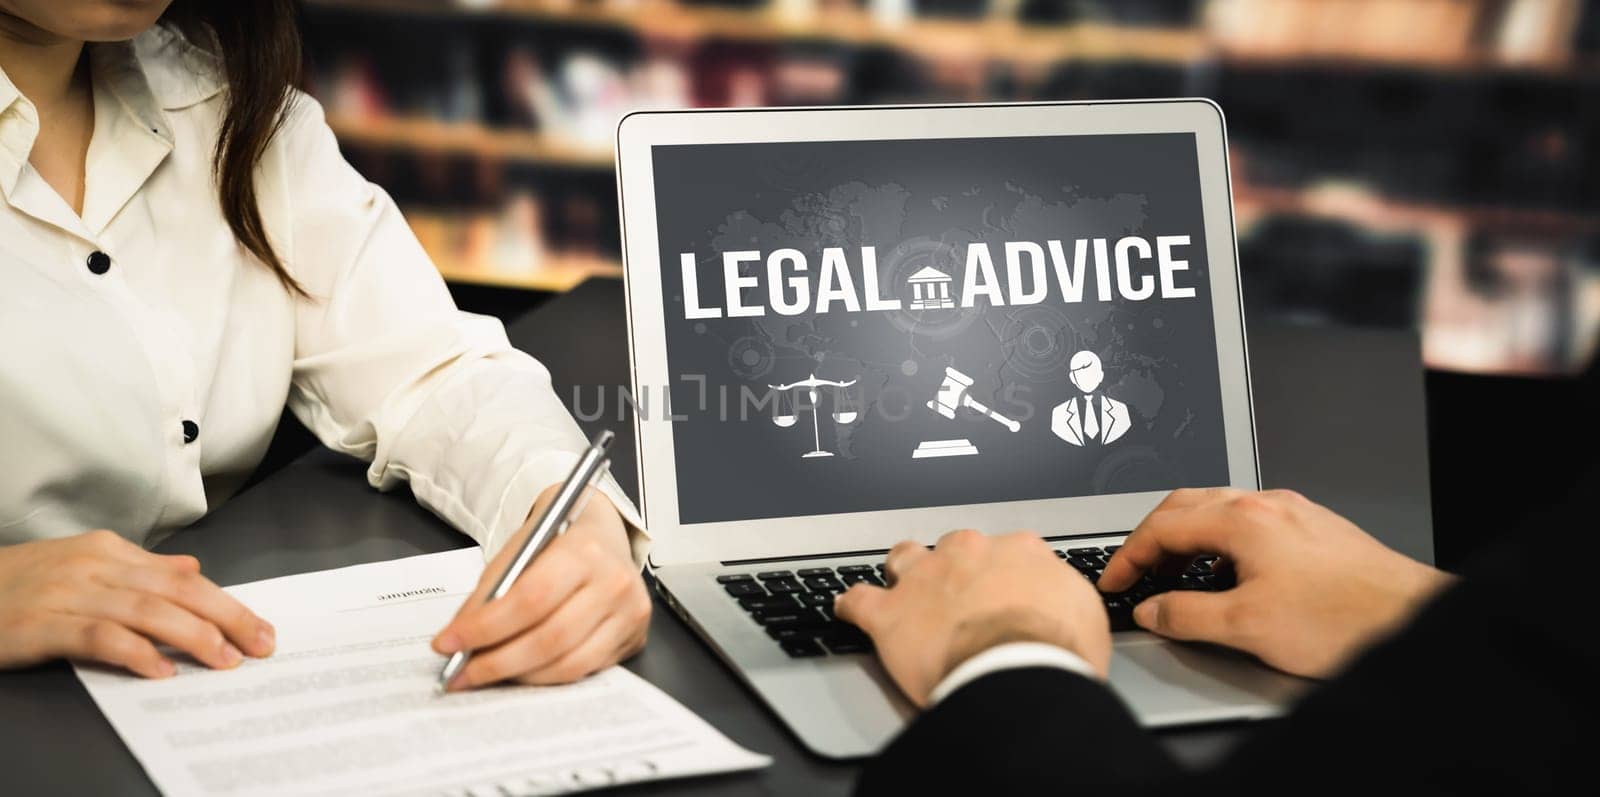 Smart legal advice website for people searching for savvy law knowledge by biancoblue